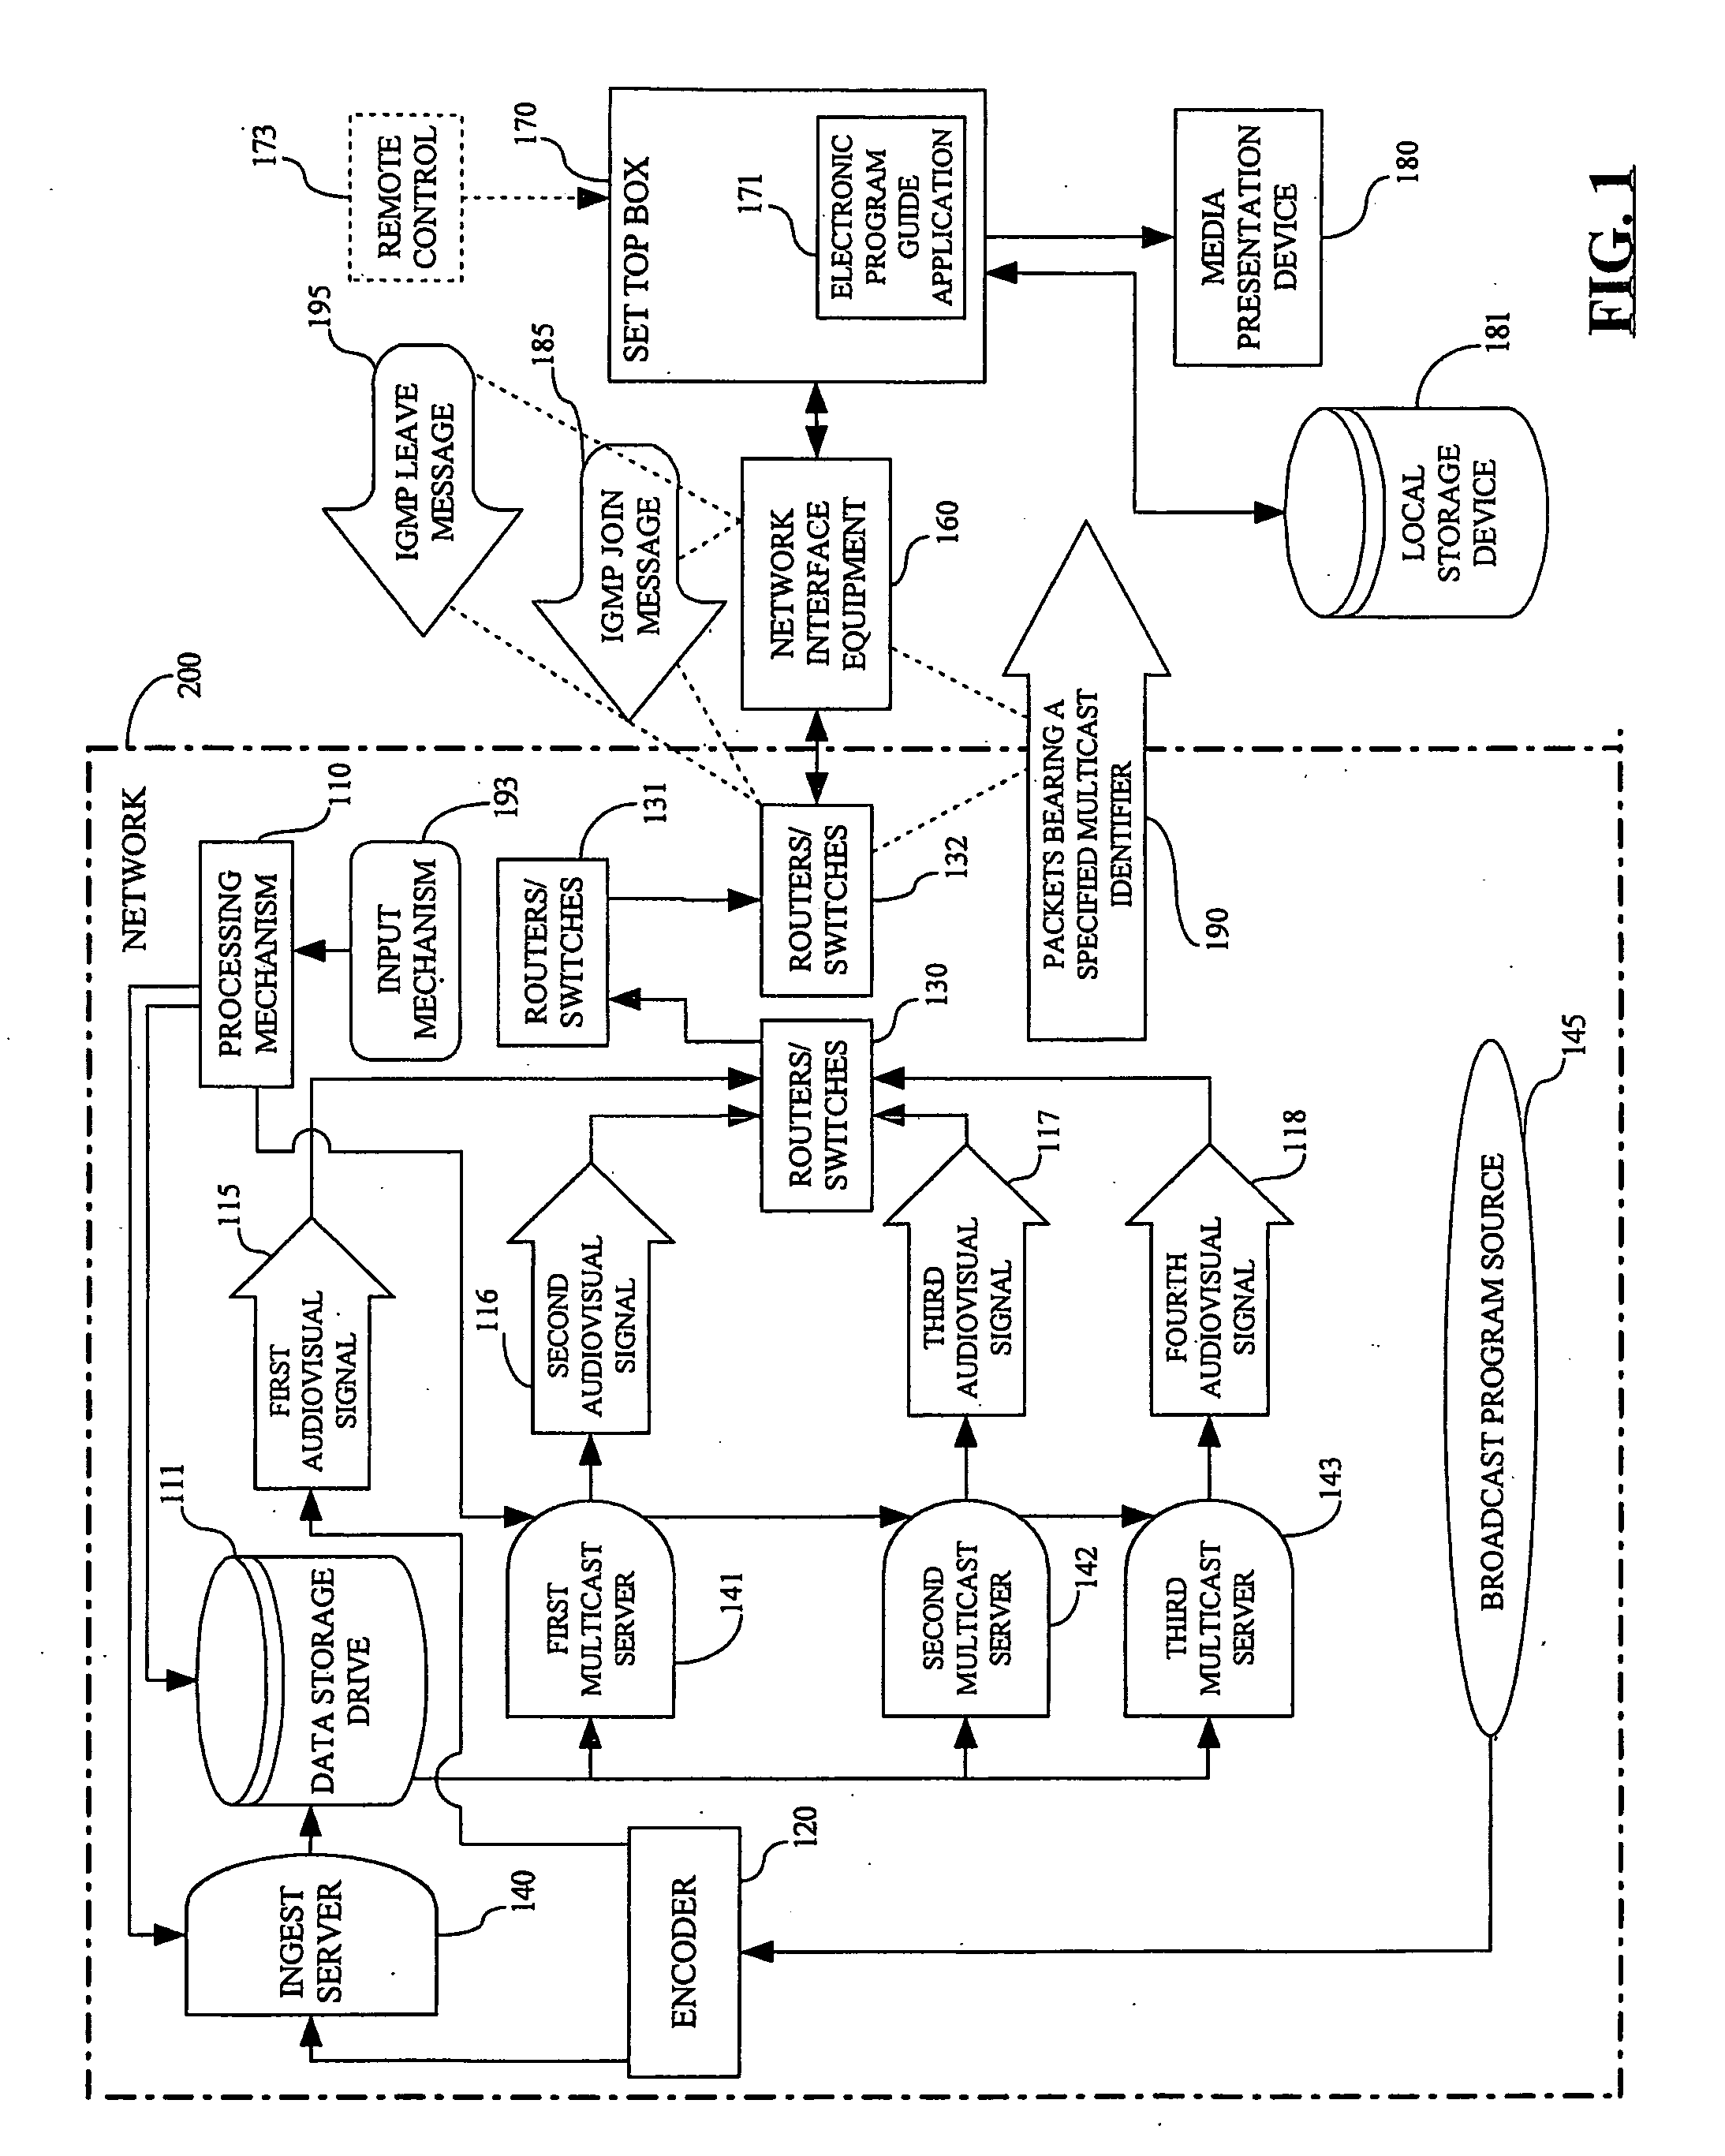 Methods, apparatuses, and computer program products for delivering one or more television programs for viewing during a specified viewing interval